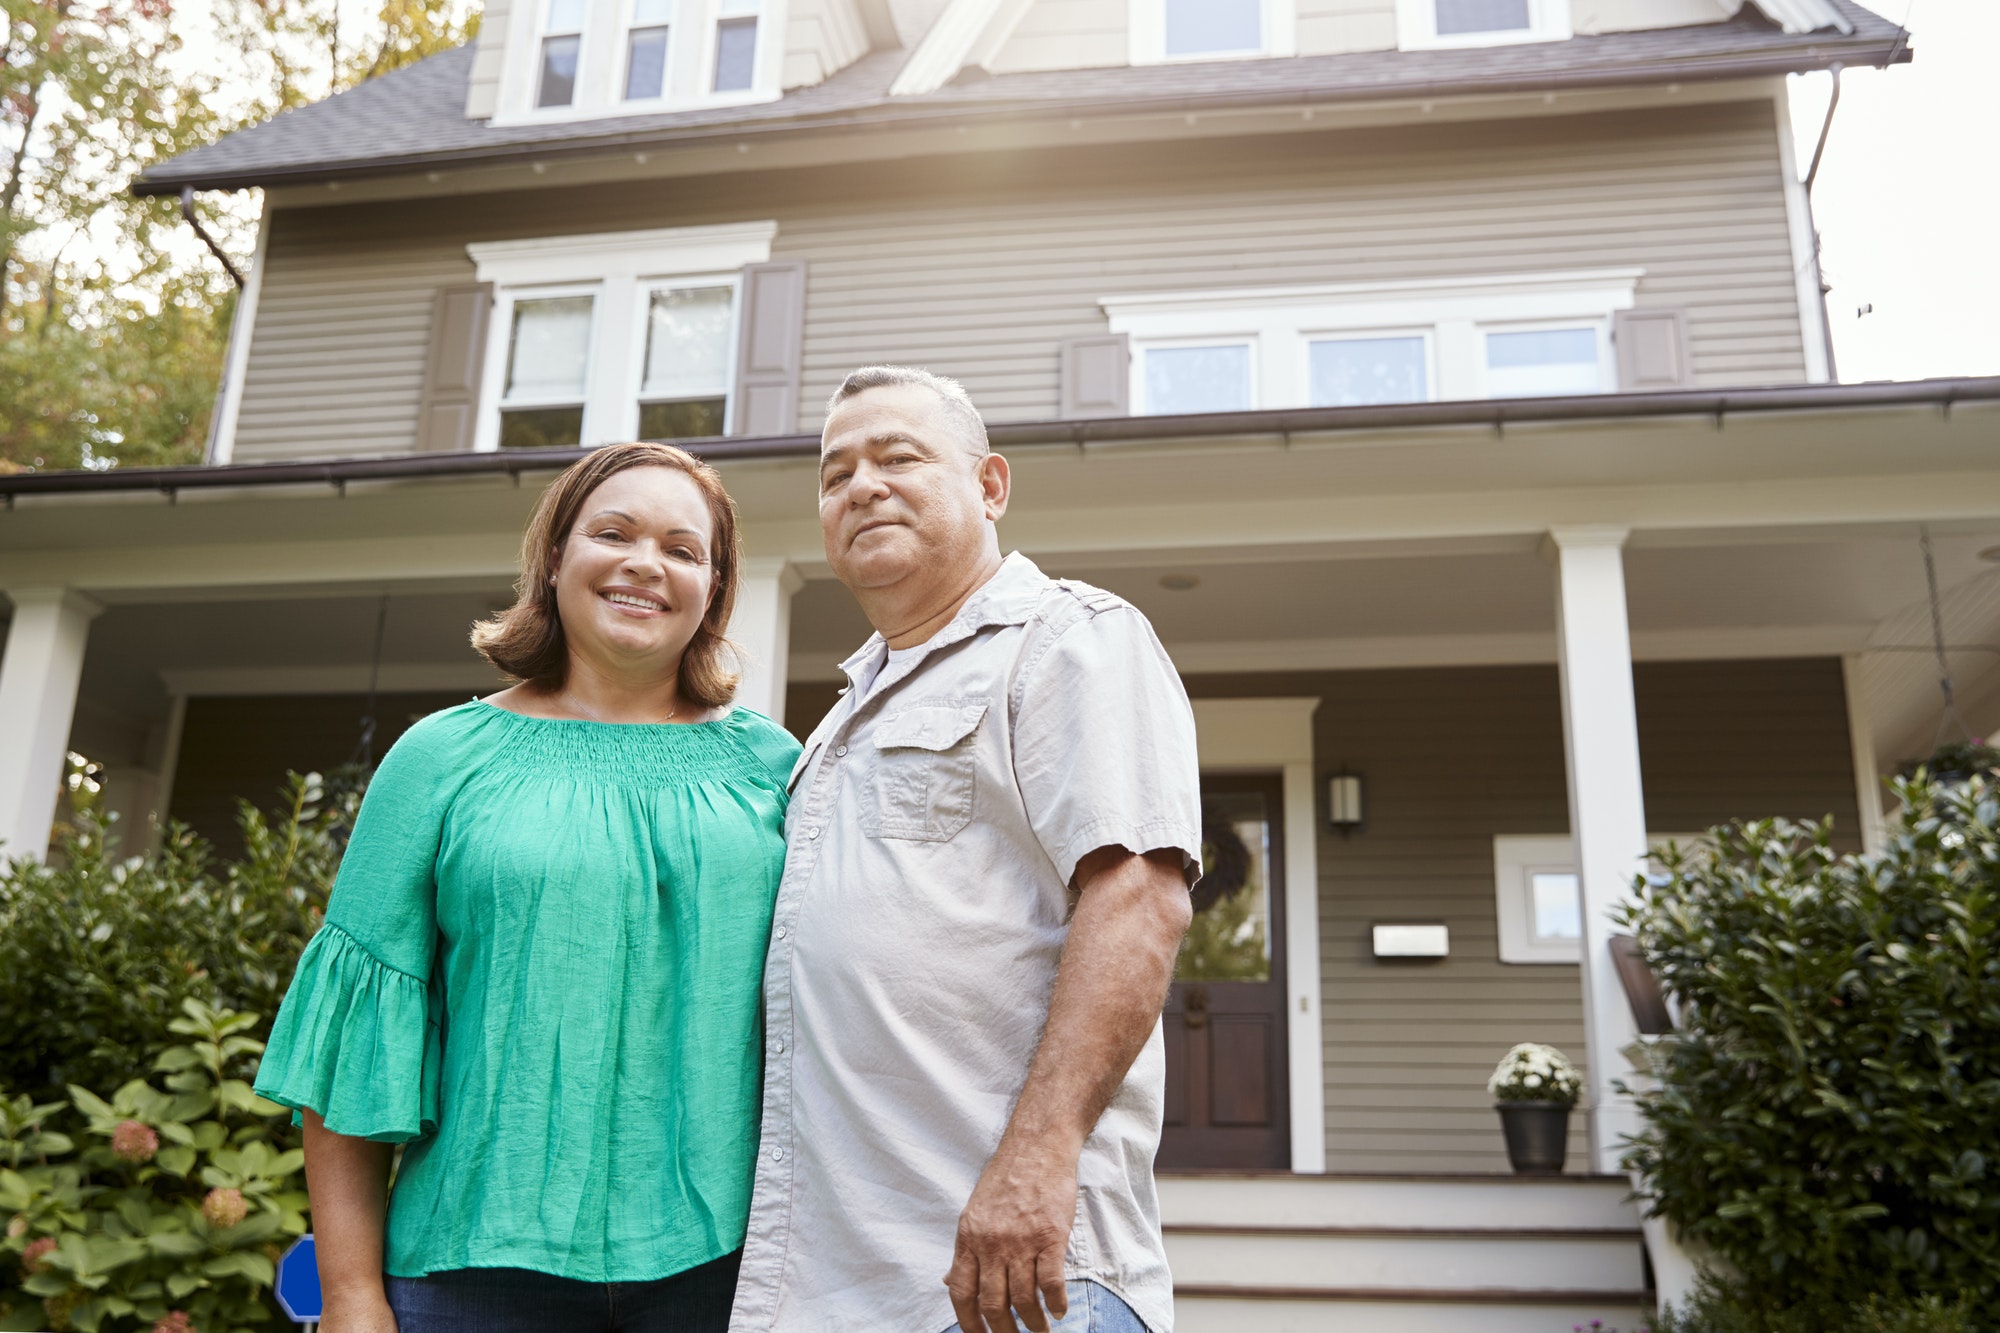 Portrait Of Smiling Senior Couple In Front Of Their Home